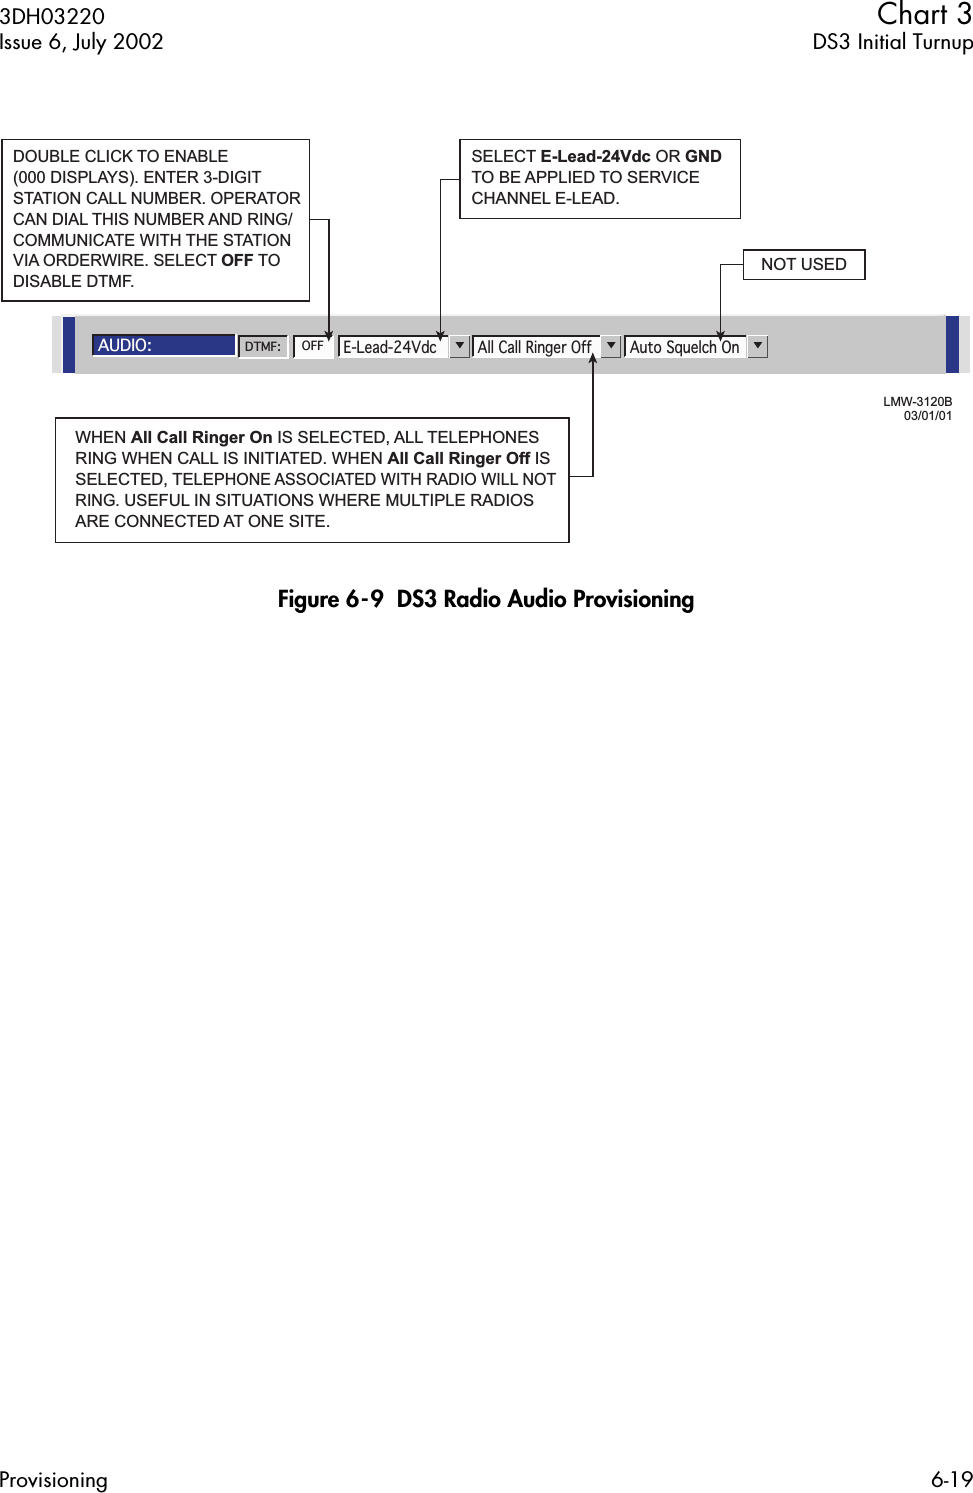  3DH03220 Chart 3 Issue 6, July 2002 DS3 Initial TurnupProvisioning 6-19 Figure 6-9  DS3 Radio Audio ProvisioningAUDIO:Auto Squelch OnAll Call Ringer OffE-Lead-24VdcDTMF: OFFLMW-3120B03/01/01SELECT E-Lead-24Vdc OR GND TO BE APPLIED TO SERVICE CHANNEL E-LEAD.NOT USEDDOUBLE CLICK TO ENABLE (000 DISPLAYS). ENTER 3-DIGIT STATION CALL NUMBER. OPERATOR CAN DIAL THIS NUMBER AND RING/COMMUNICATE WITH THE STATIONVIA ORDERWIRE. SELECT OFF TO DISABLE DTMF.WHEN All Call Ringer On IS SELECTED, ALL TELEPHONES RING WHEN CALL IS INITIATED. WHEN All Call Ringer Off IS SELECTED, TELEPHONE ASSOCIATED WITH RADIO WILL NOT RING. USEFUL IN SITUATIONS WHERE MULTIPLE RADIOS ARE CONNECTED AT ONE SITE.